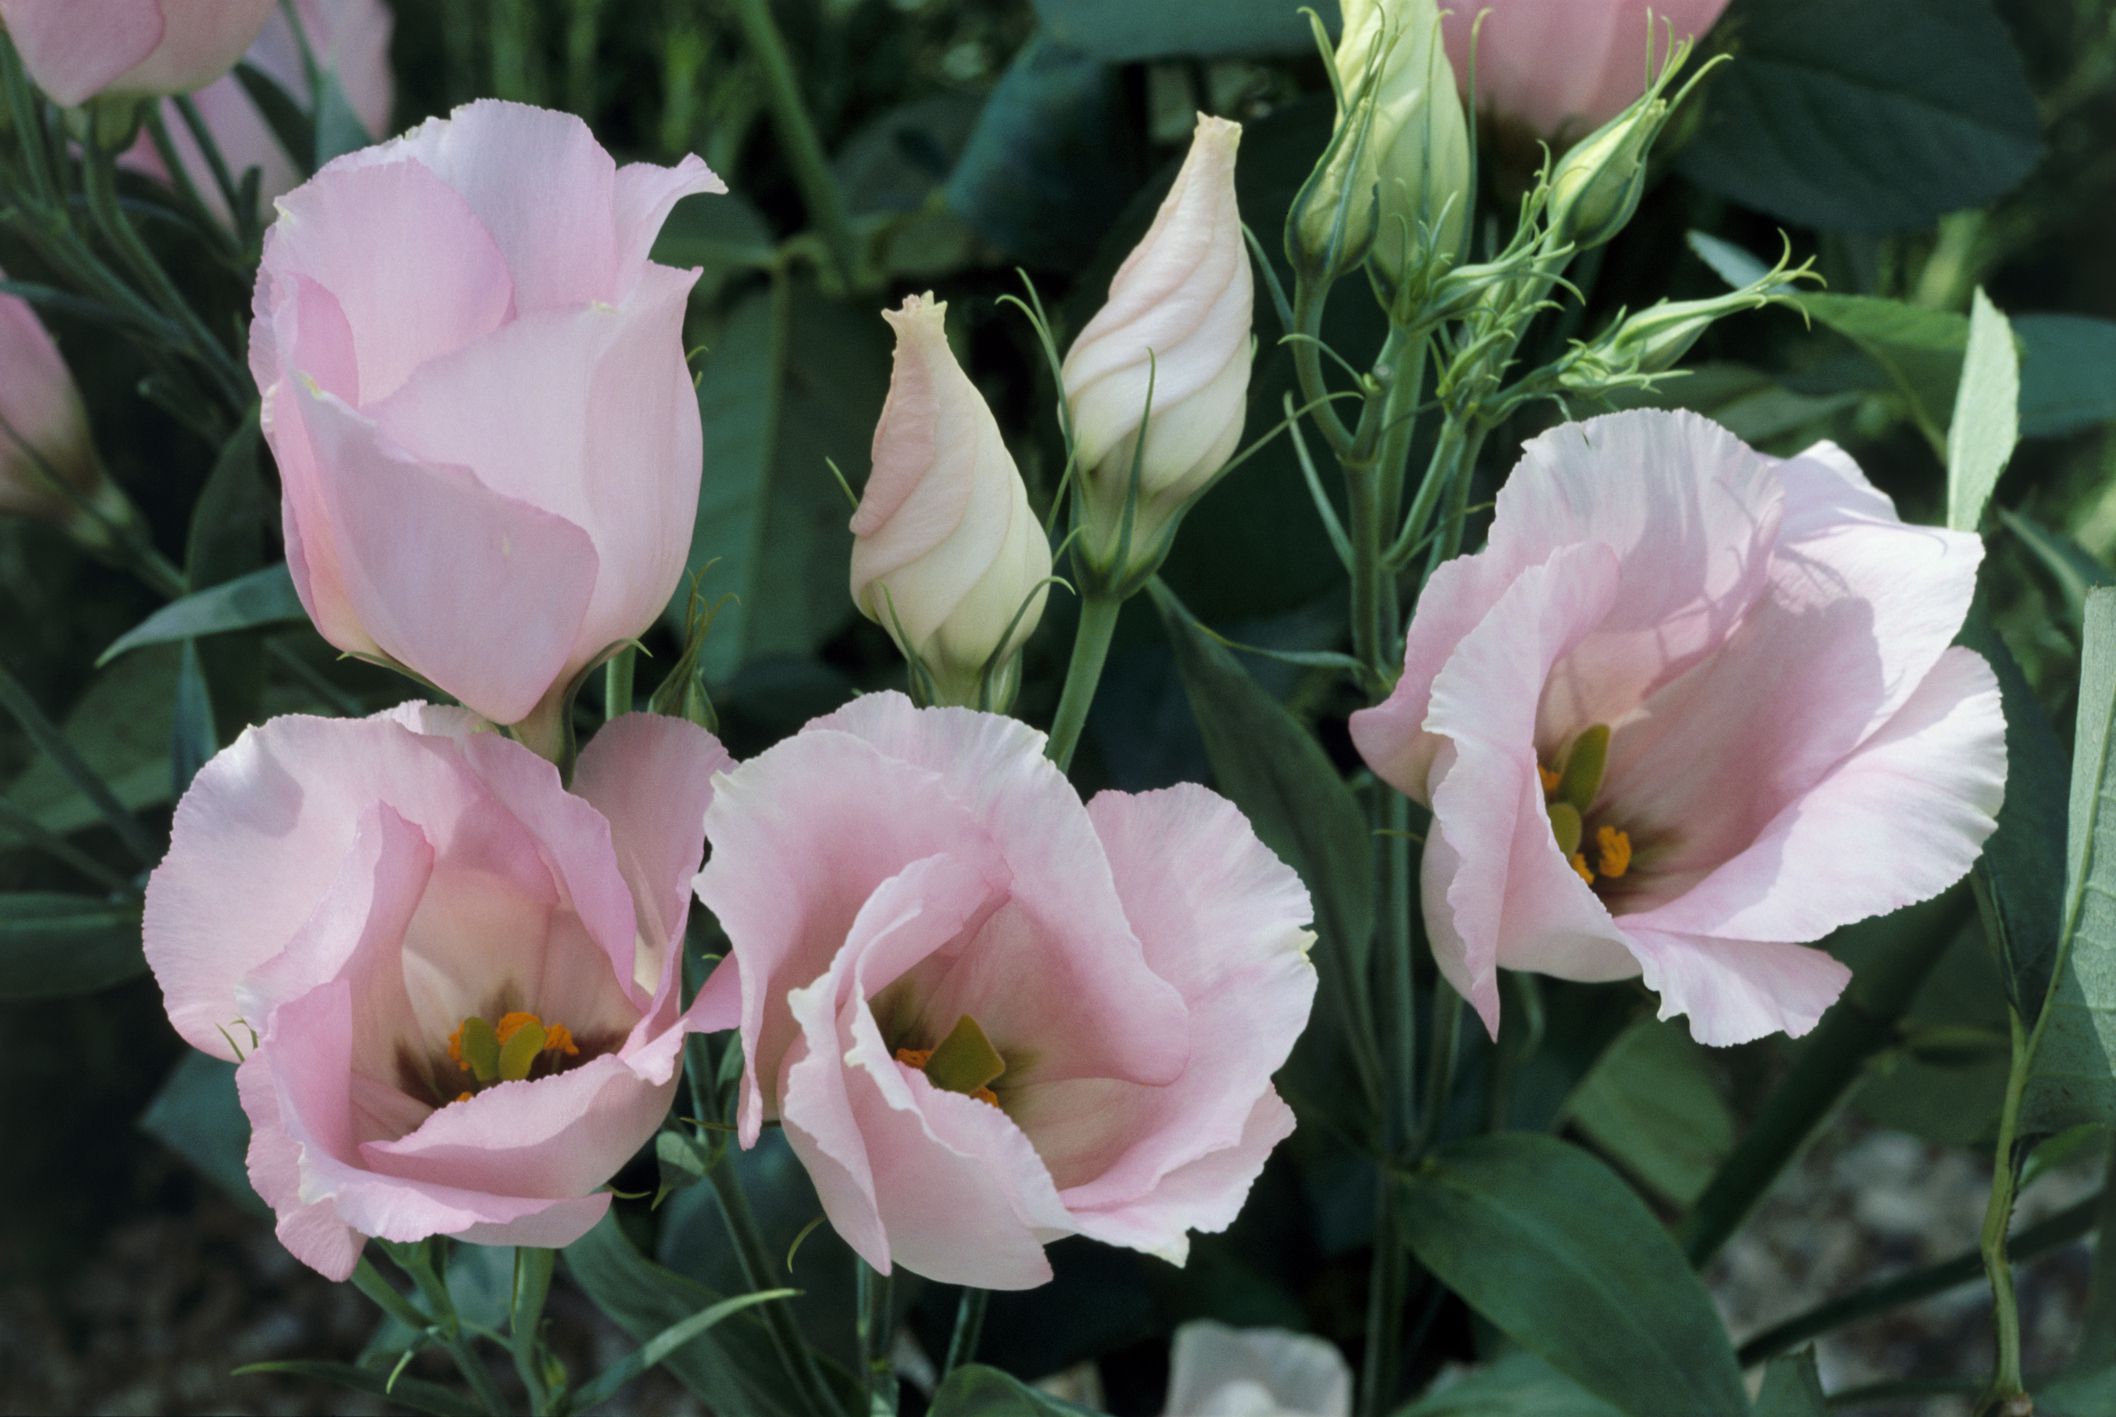 How to Grow Lisianthus Flowers in the Garden